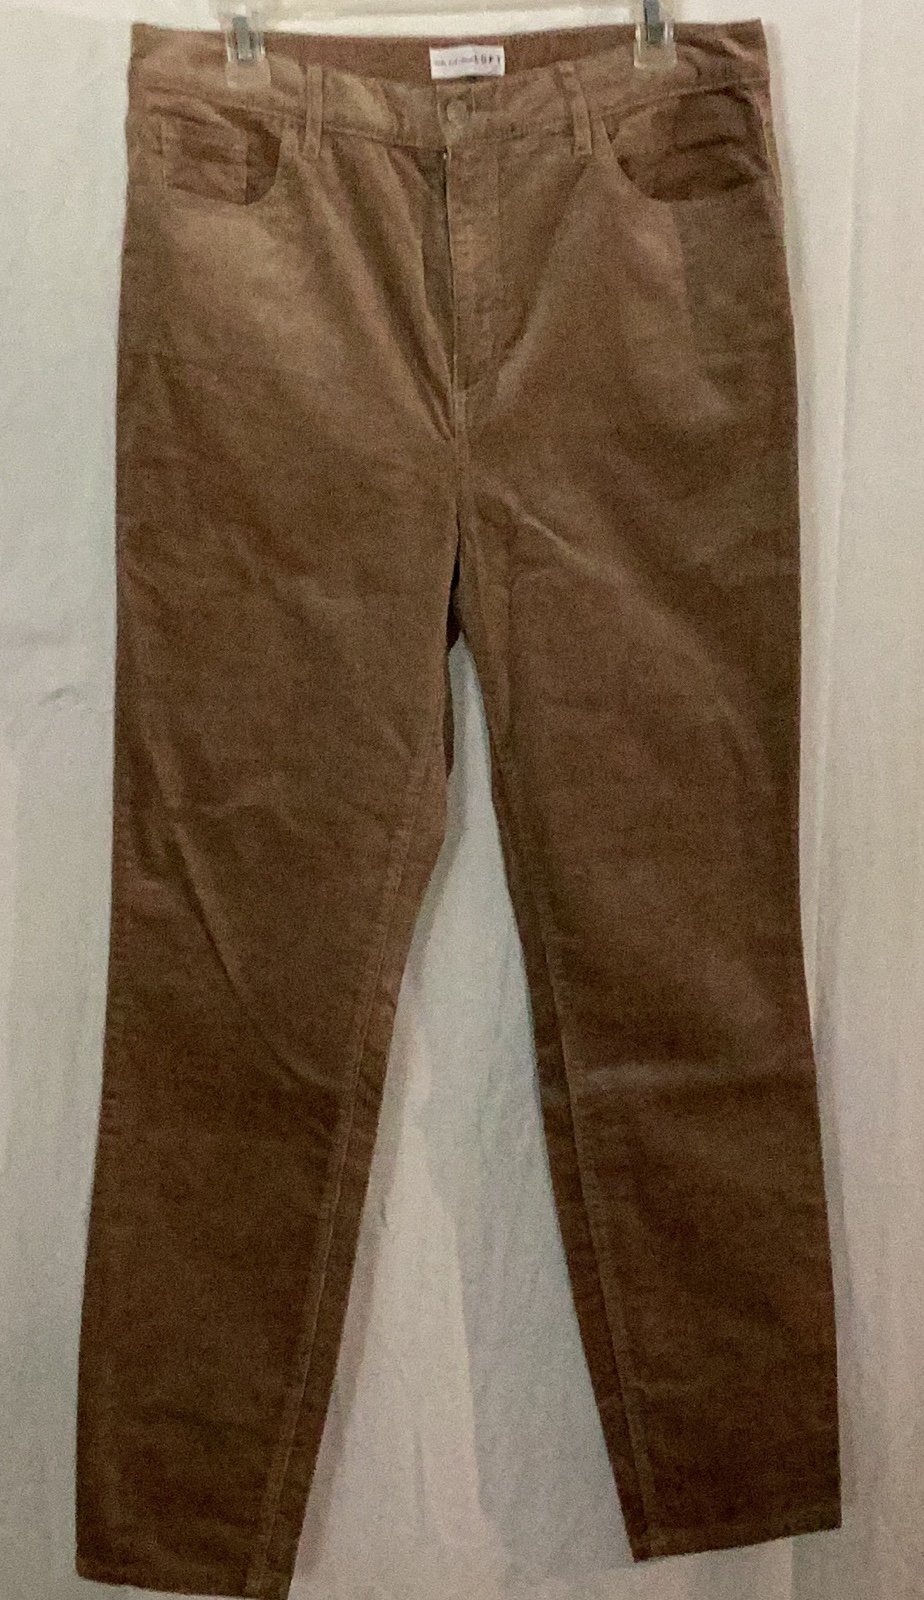 high discount LOFT WOMEN’s pants fUI2K11pU Everyday Low Prices